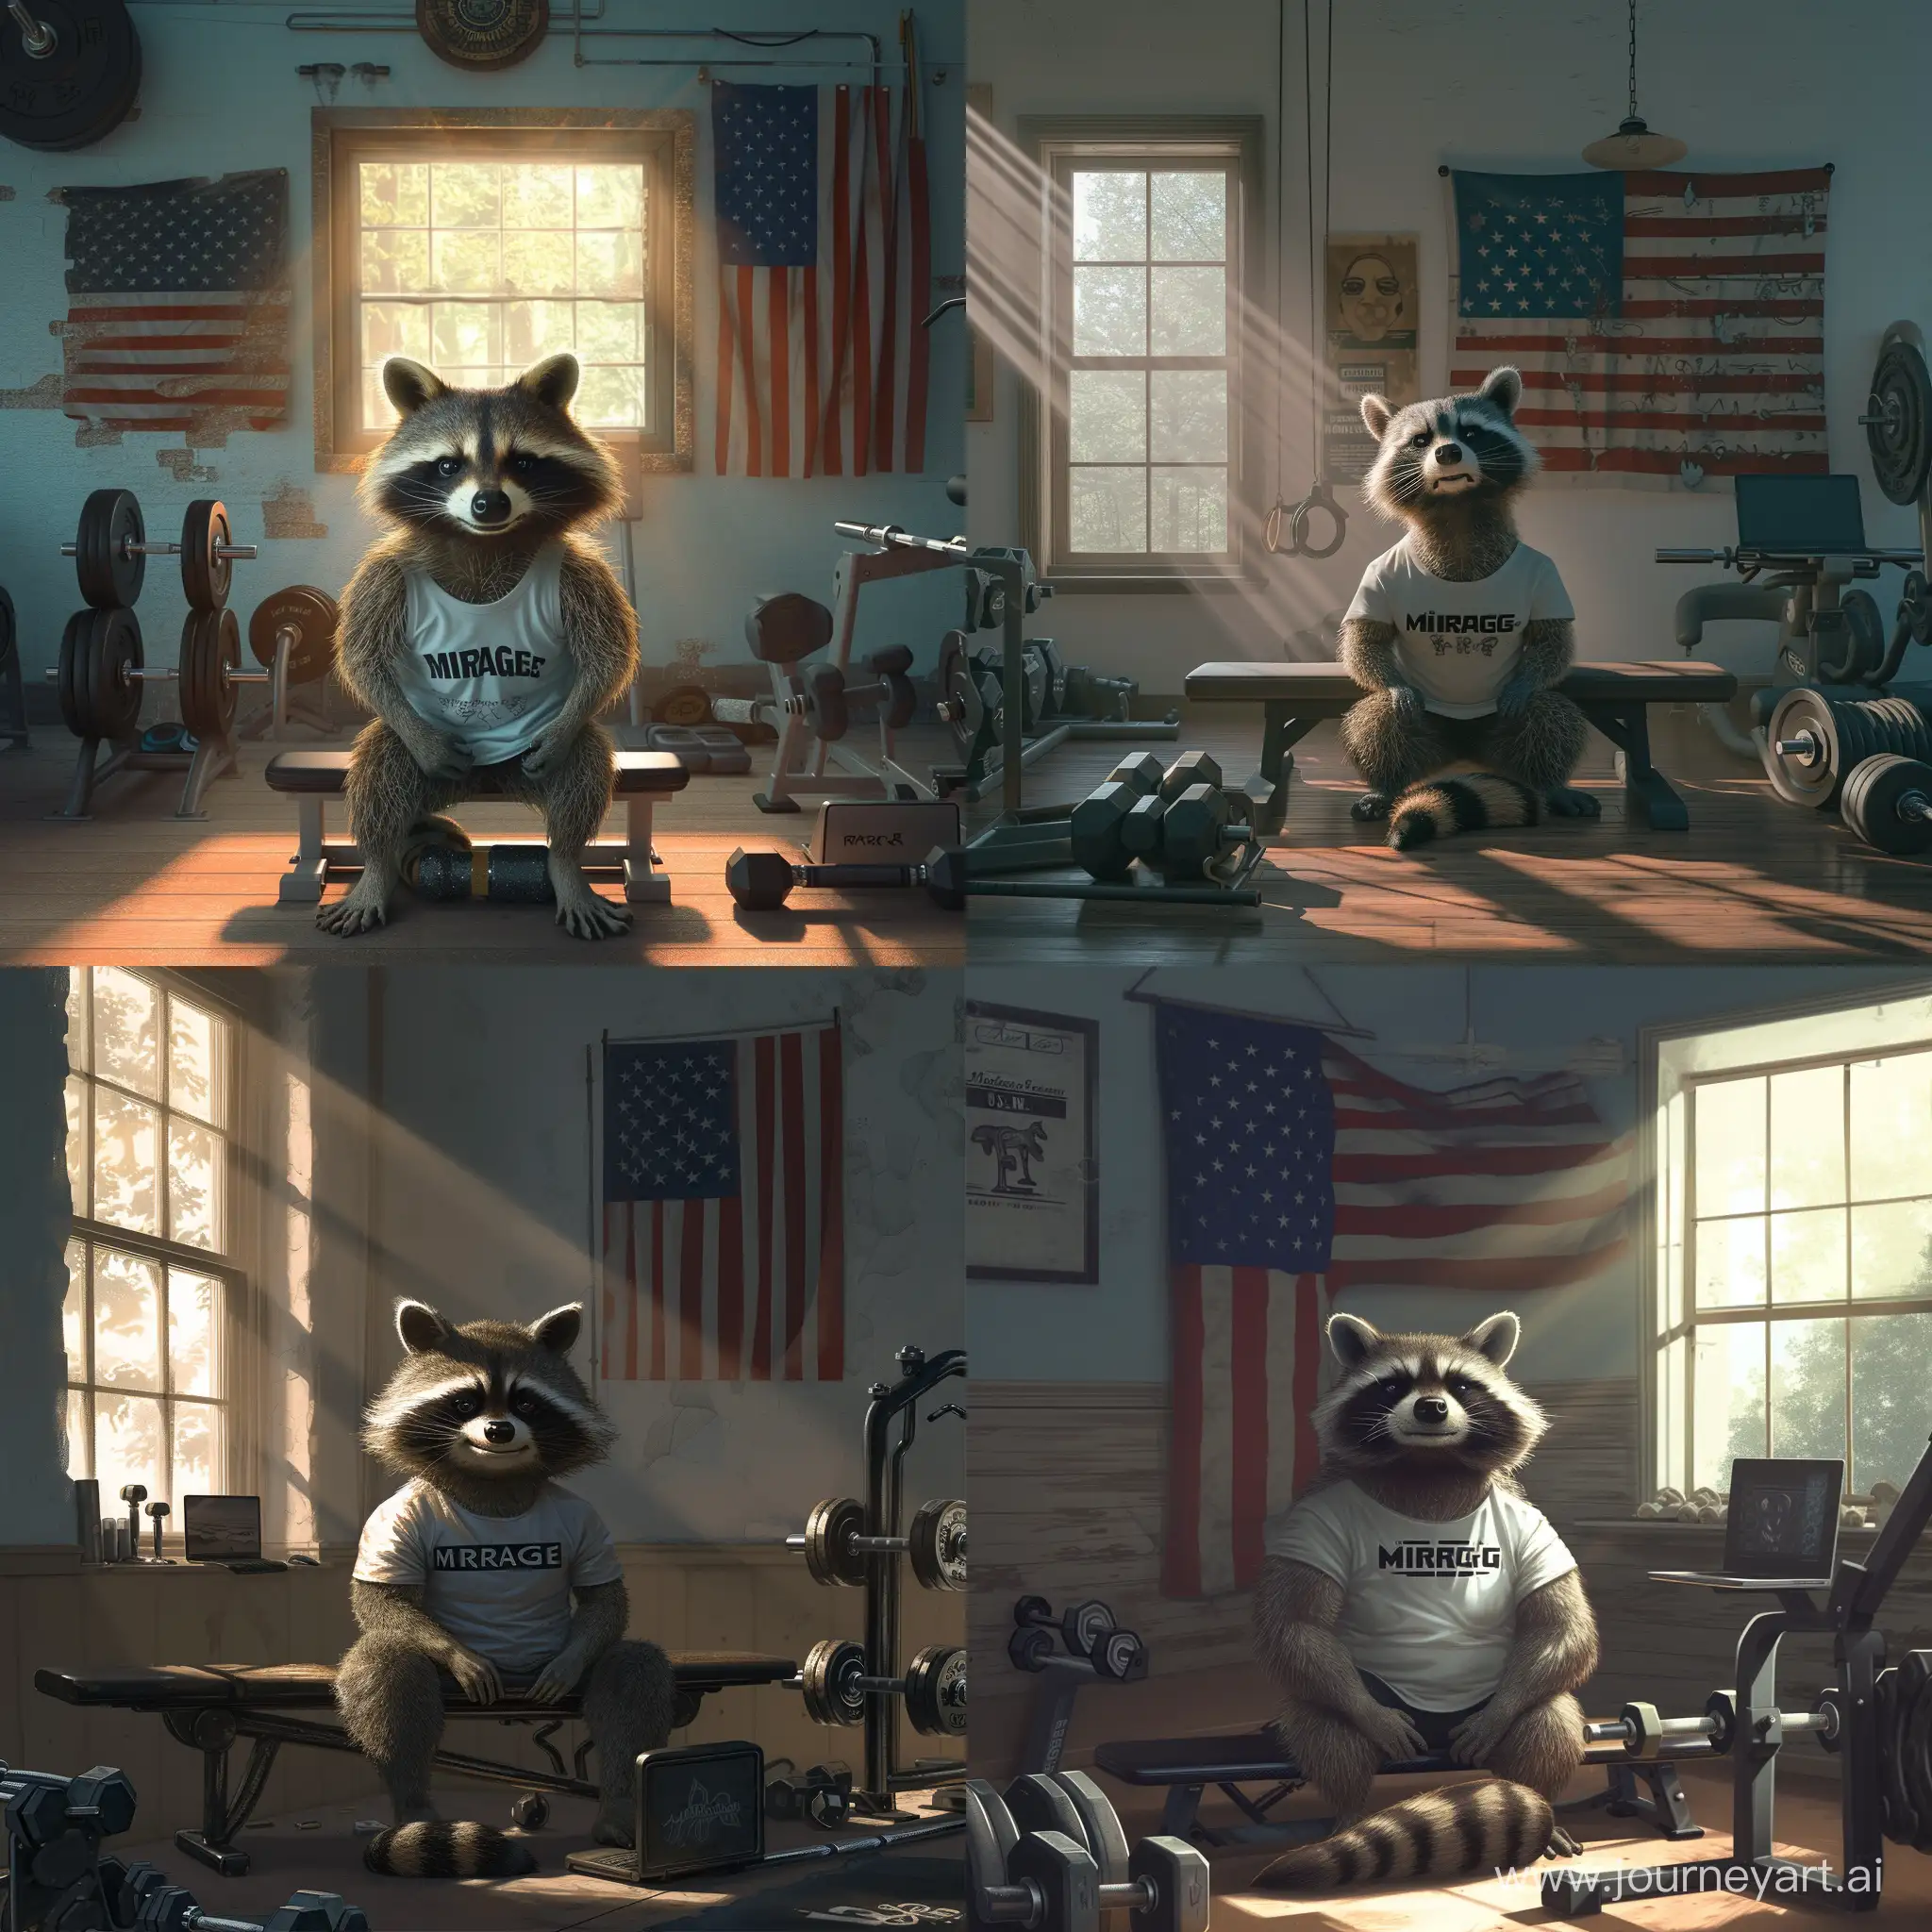 Create 800x800 images. The action takes place in a gym. In the centre of the image a pumped up raccoon is sitting on a bench, behind him on the wall of the gym hangs a US flag. The raccoon is wearing a T-shirt that accentuates his muscles, the T-shirt is white in colour and has the black inscription "MIRAGE" on it. On the right side of the photo there is a window from which rays of light fall directly on the raccoon, under the window there are dumbbells. The raccoon is sitting in the pose of Arnold Schwarzneger. The raccoon is smiling and has a kind look. There is a barbell and a laptop near the raccoon